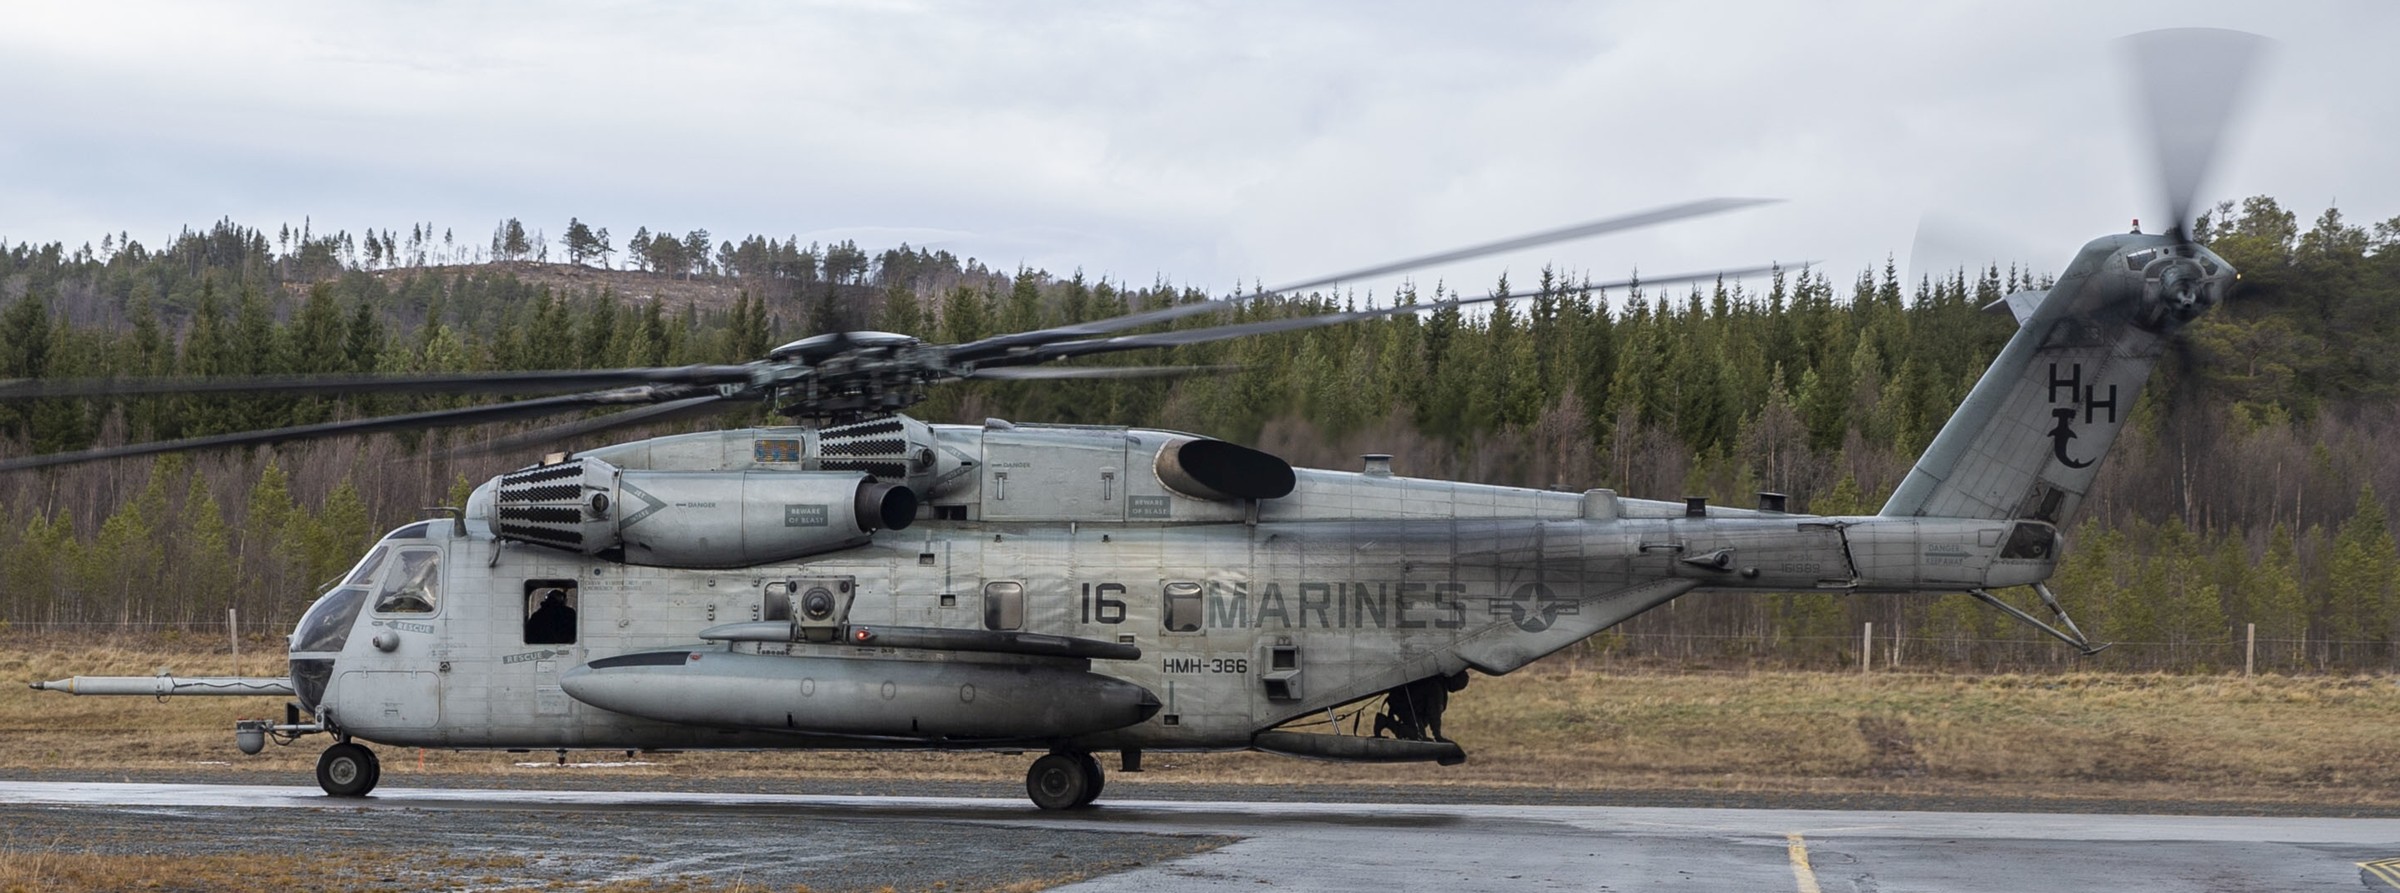 hmh-366 hammerheads marine heavy helicopter squadron usmc sikorsky ch-53e super stallion 80 nato exercise trident juncture